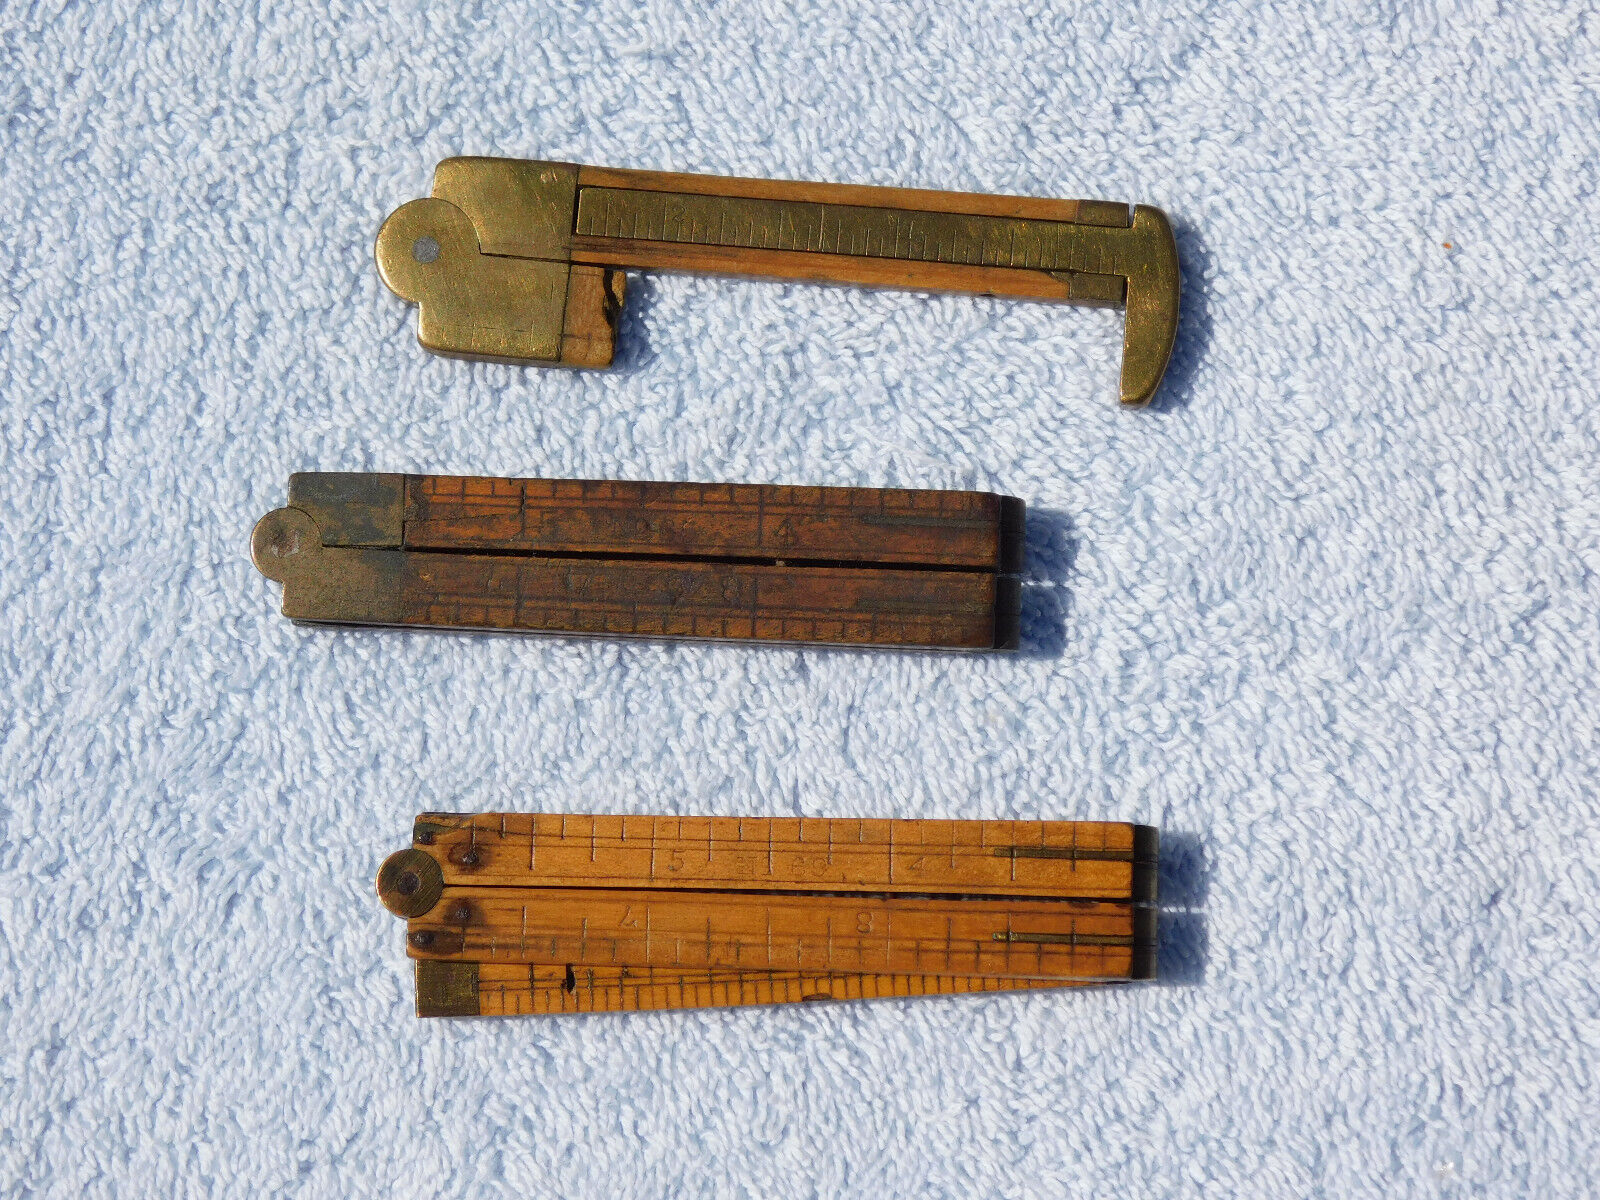 Lot of 3 Vintage Boxwood & Brass Folding Rulers - one broken with caliper